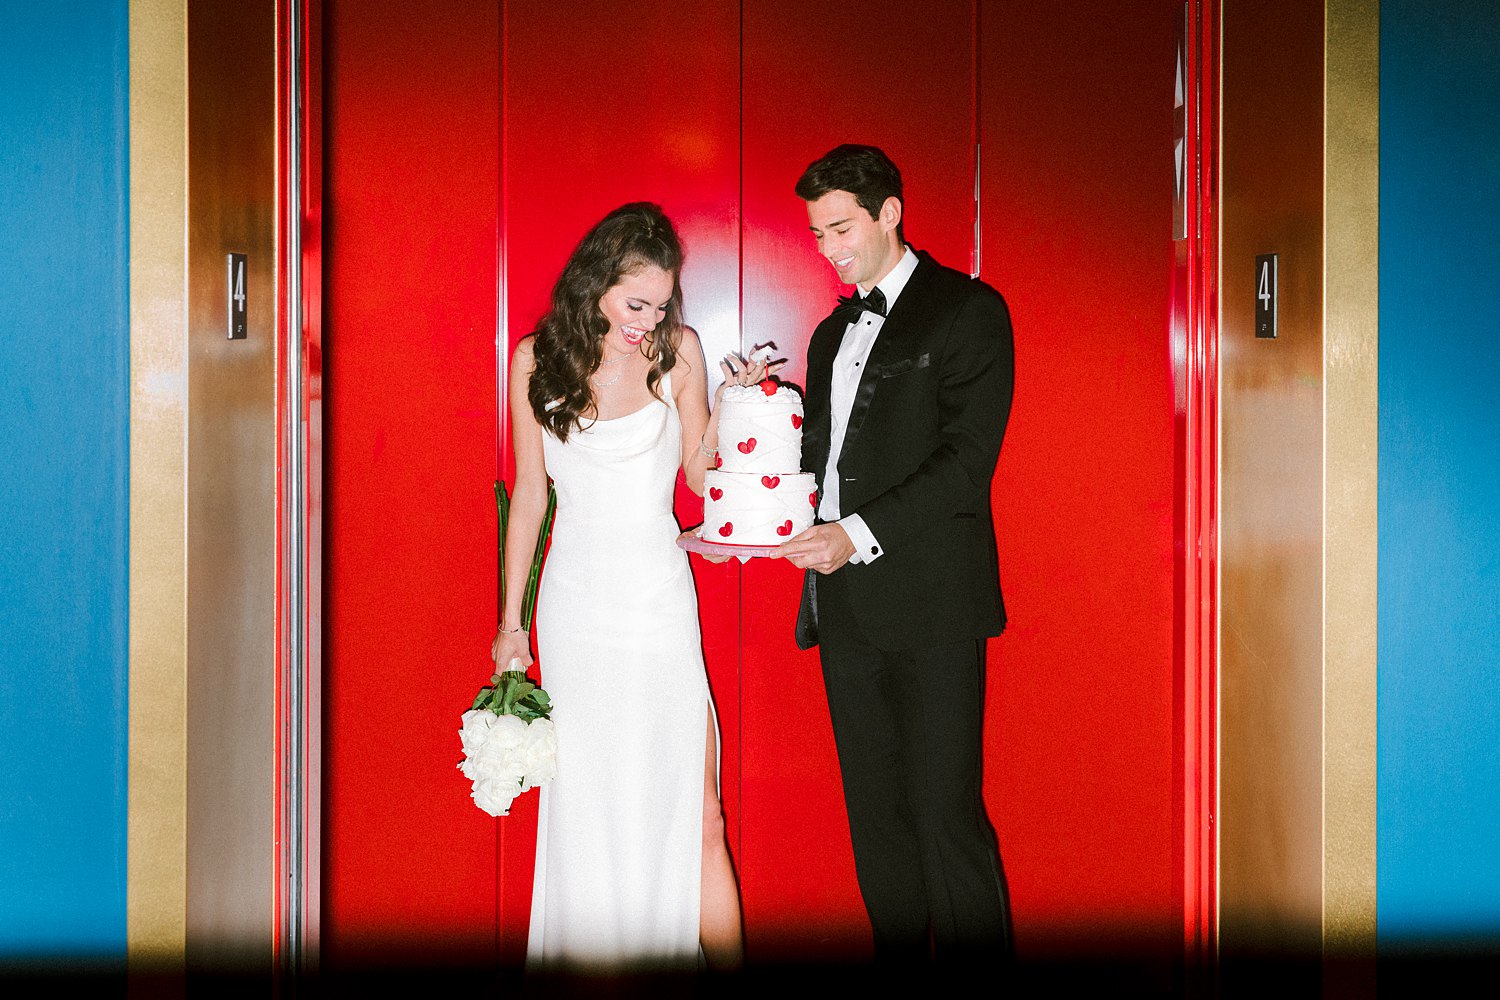 Man in black tuxedo and bowtie standing with Vintage wedding cake in hands next to woman in white dress holding flower bouquet in red elevator with blue walls